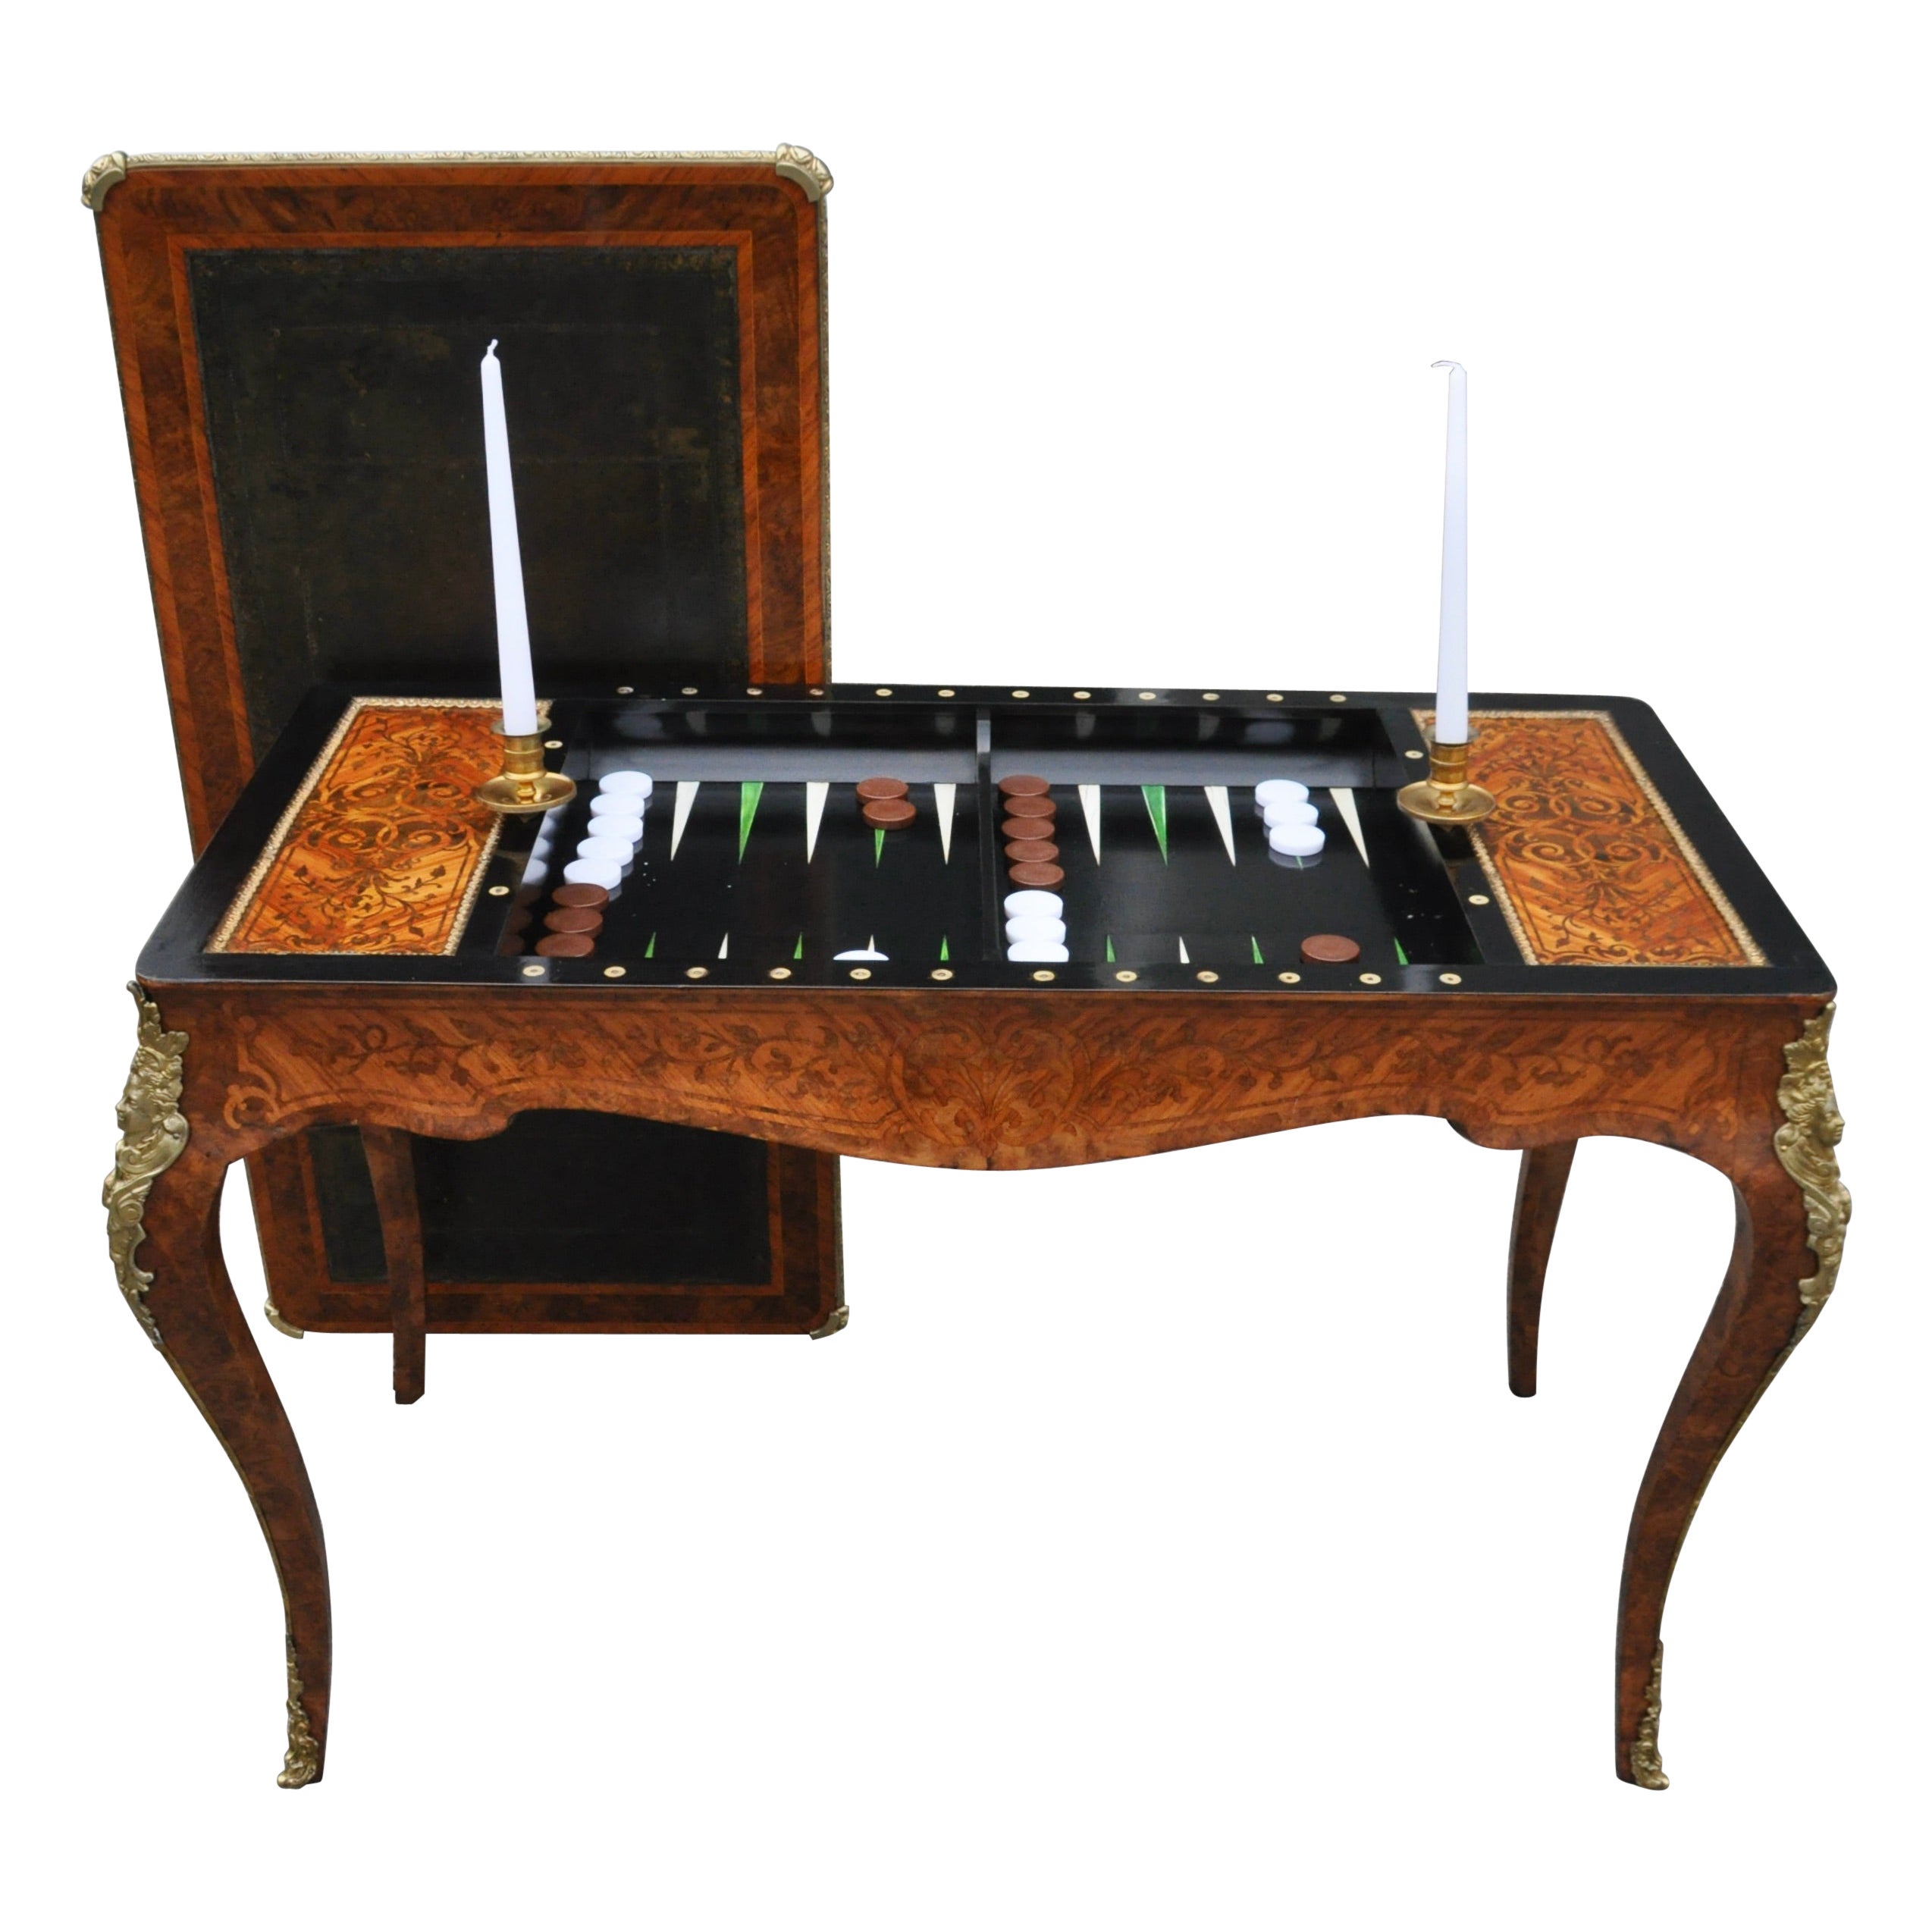 19th Century French Kingwood Regence Style Tric-Trac Games Table